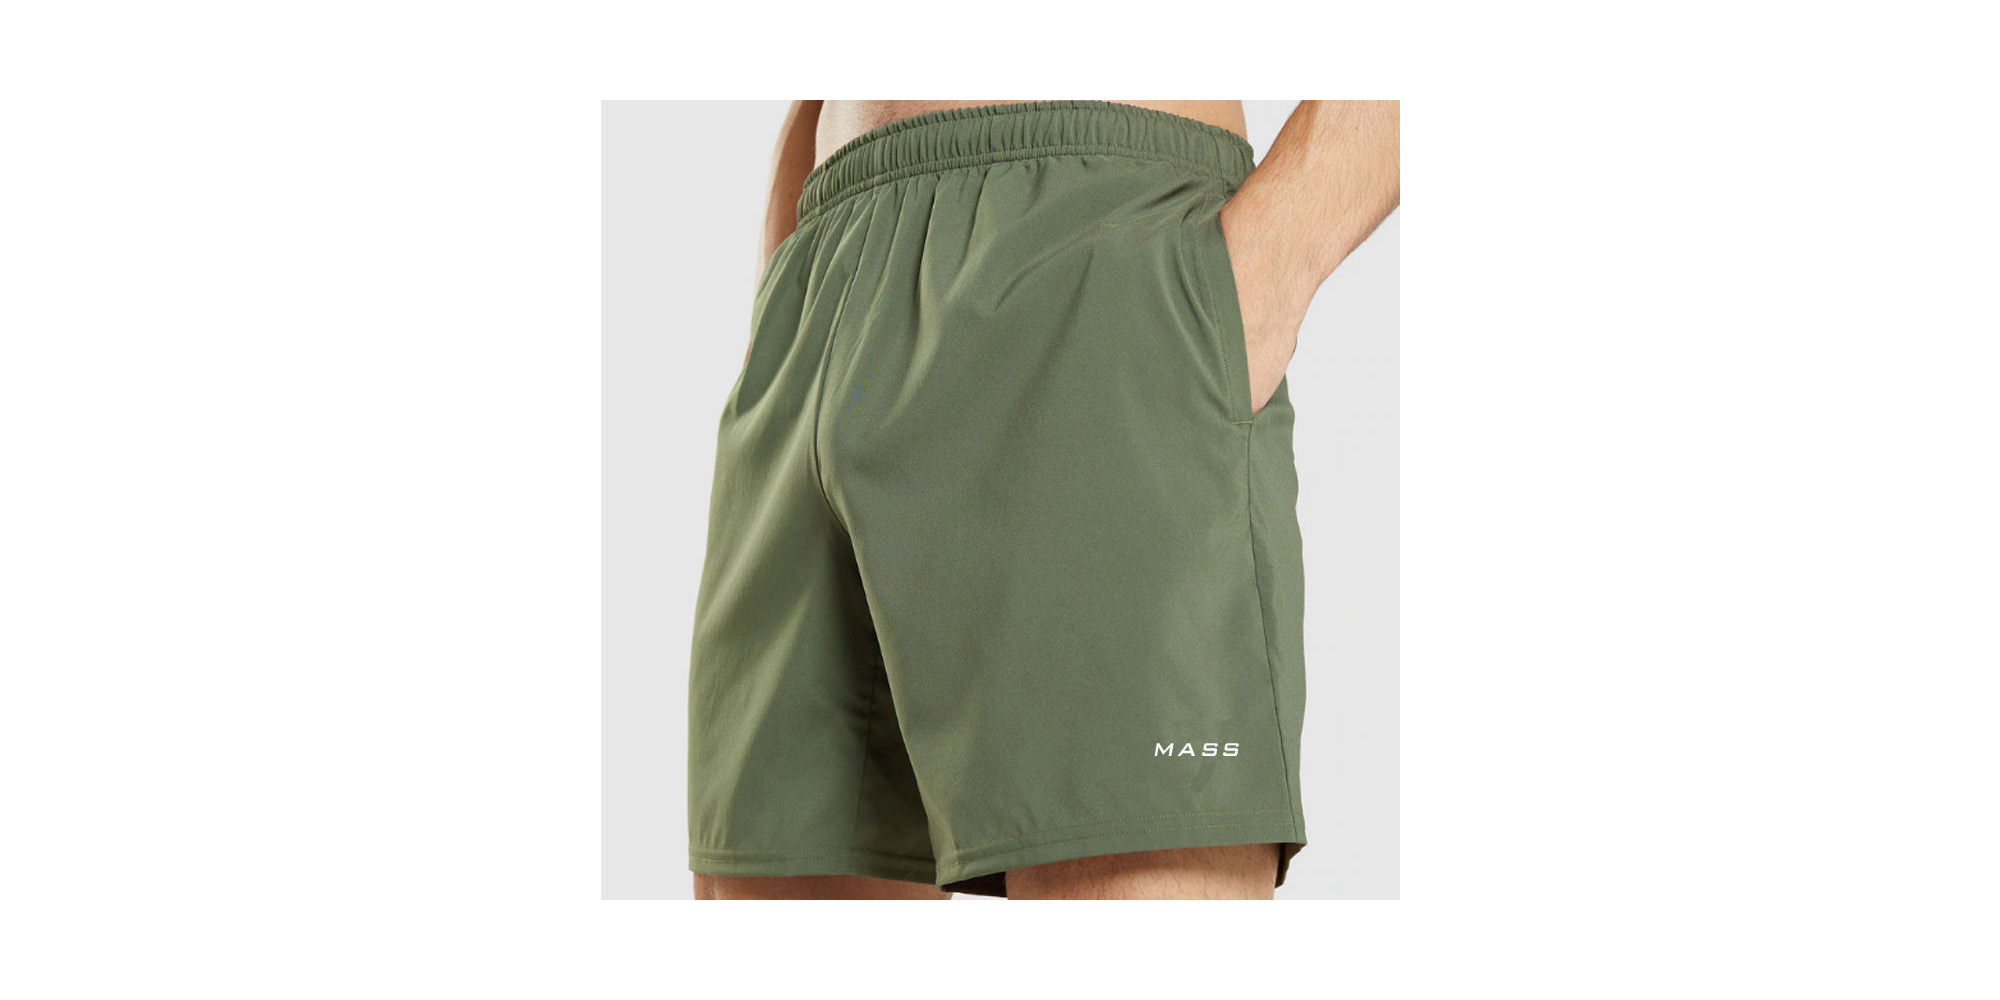 The Most Outstanding Features Of Polyester shorts